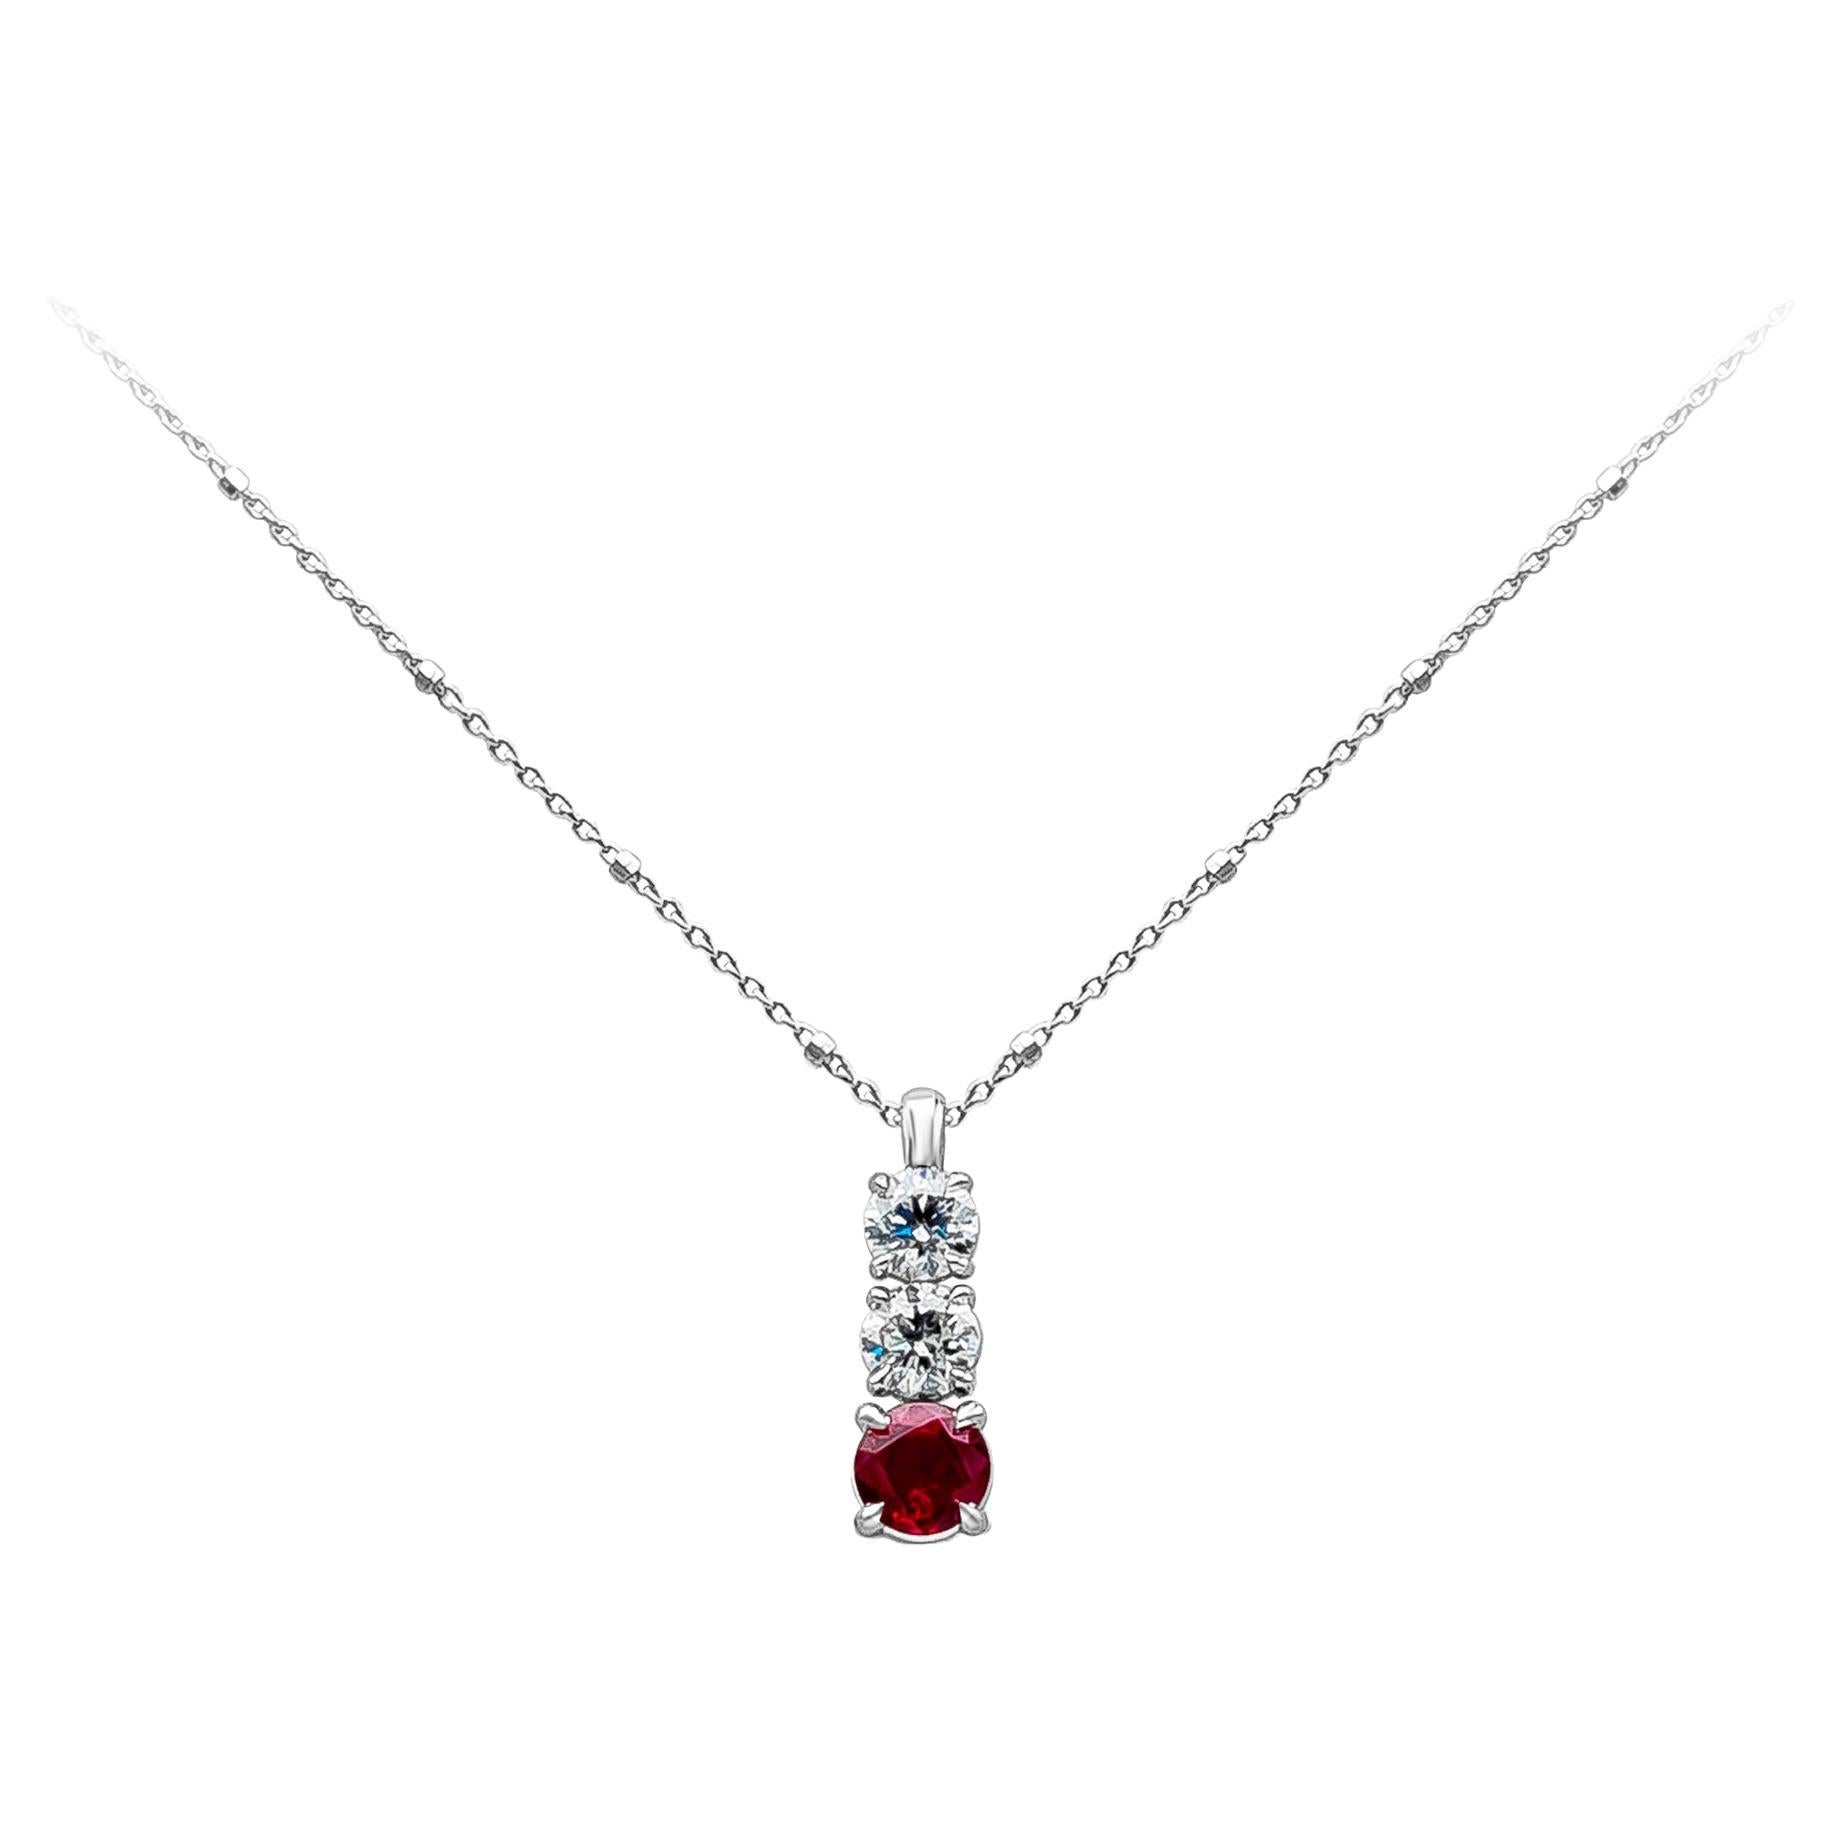 Roman Malakov 1.76 Carats Total Round Cut Three-Stone Pendant Necklace For Sale